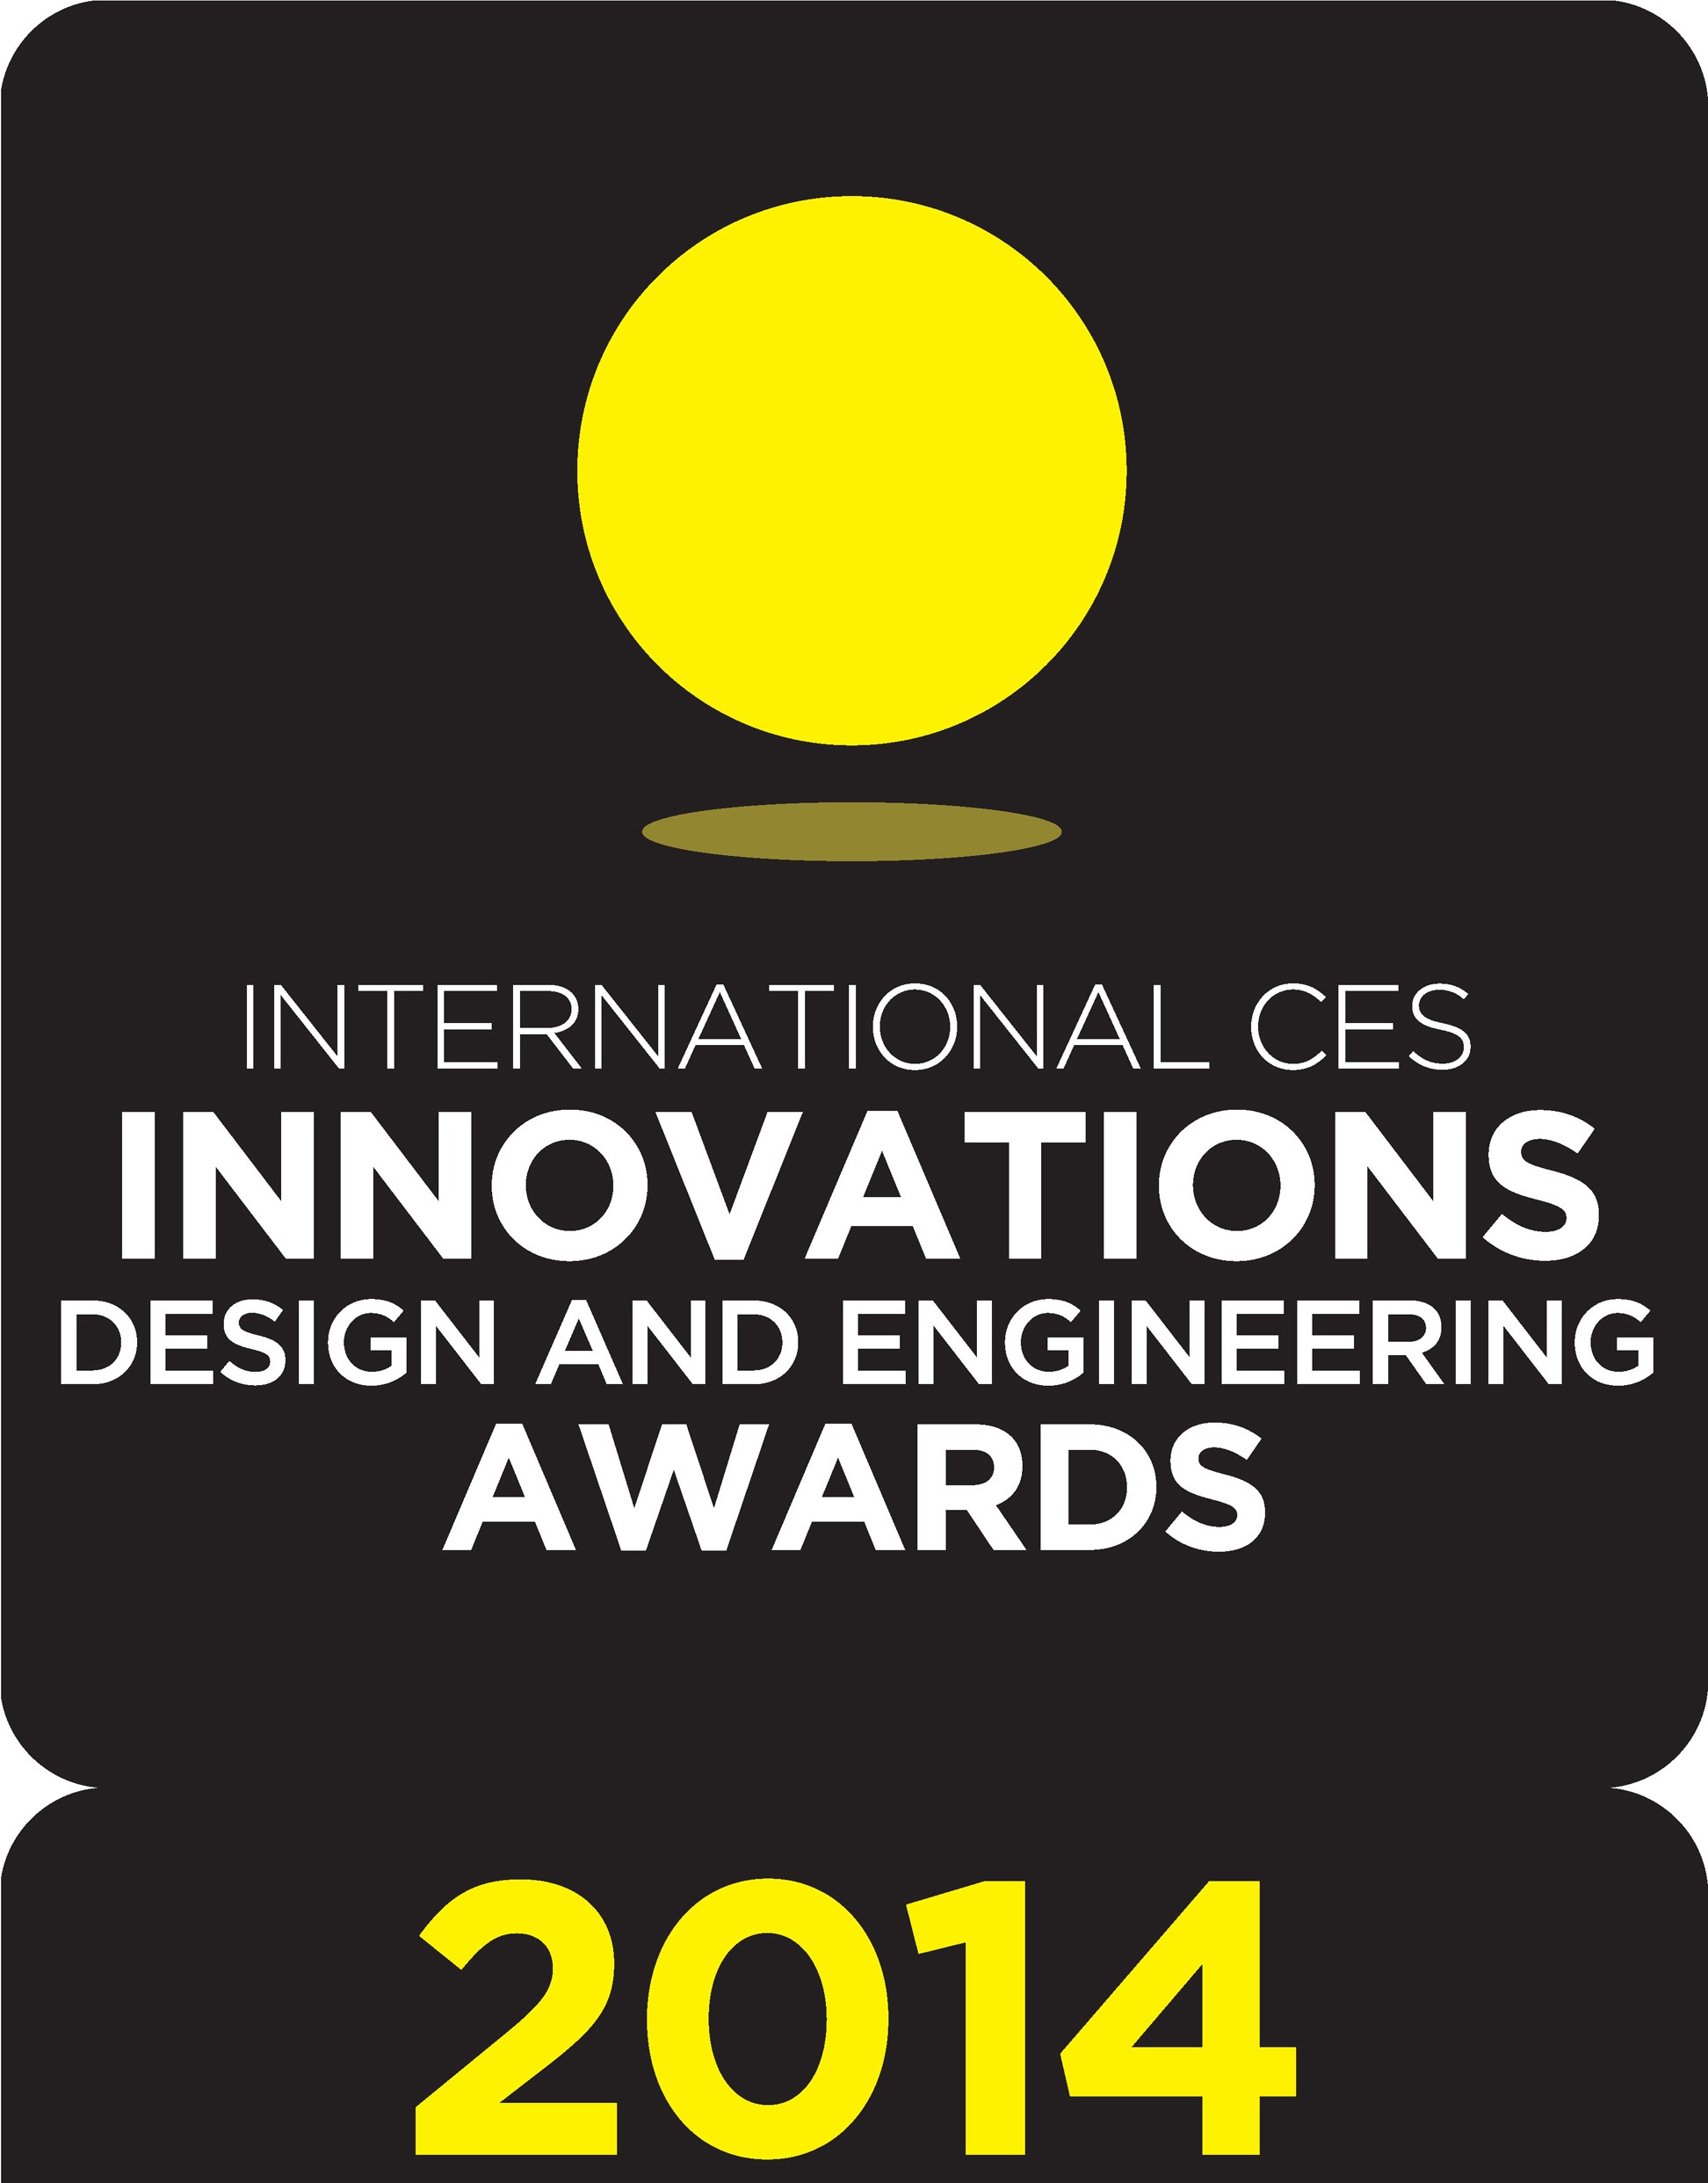 Susan Schreiner Selected as 2014 CES Innovations Awards Judge